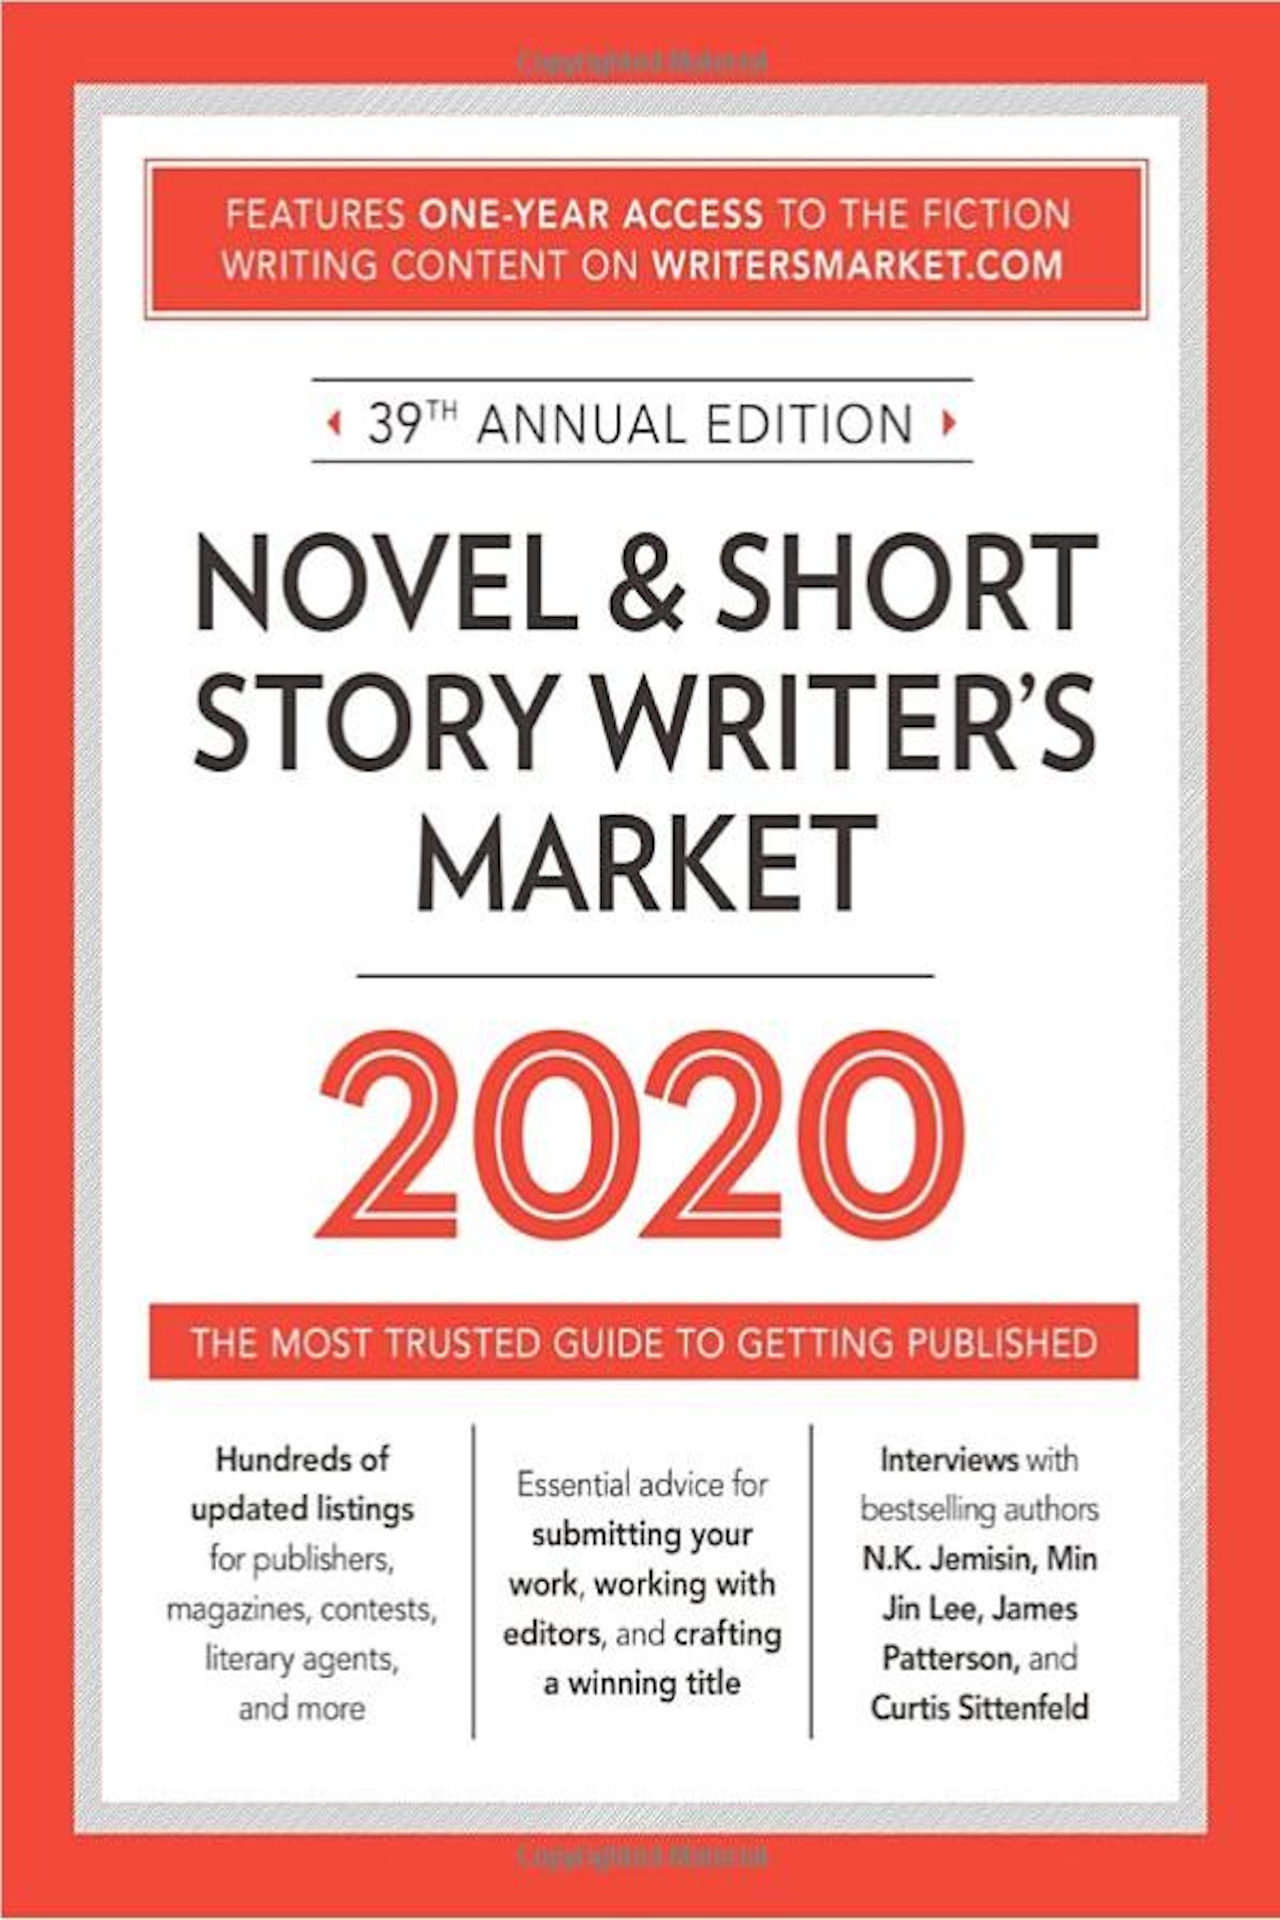 Novel & Short Story Writer's Market 2020: The Most Trusted Guide to Getting Published